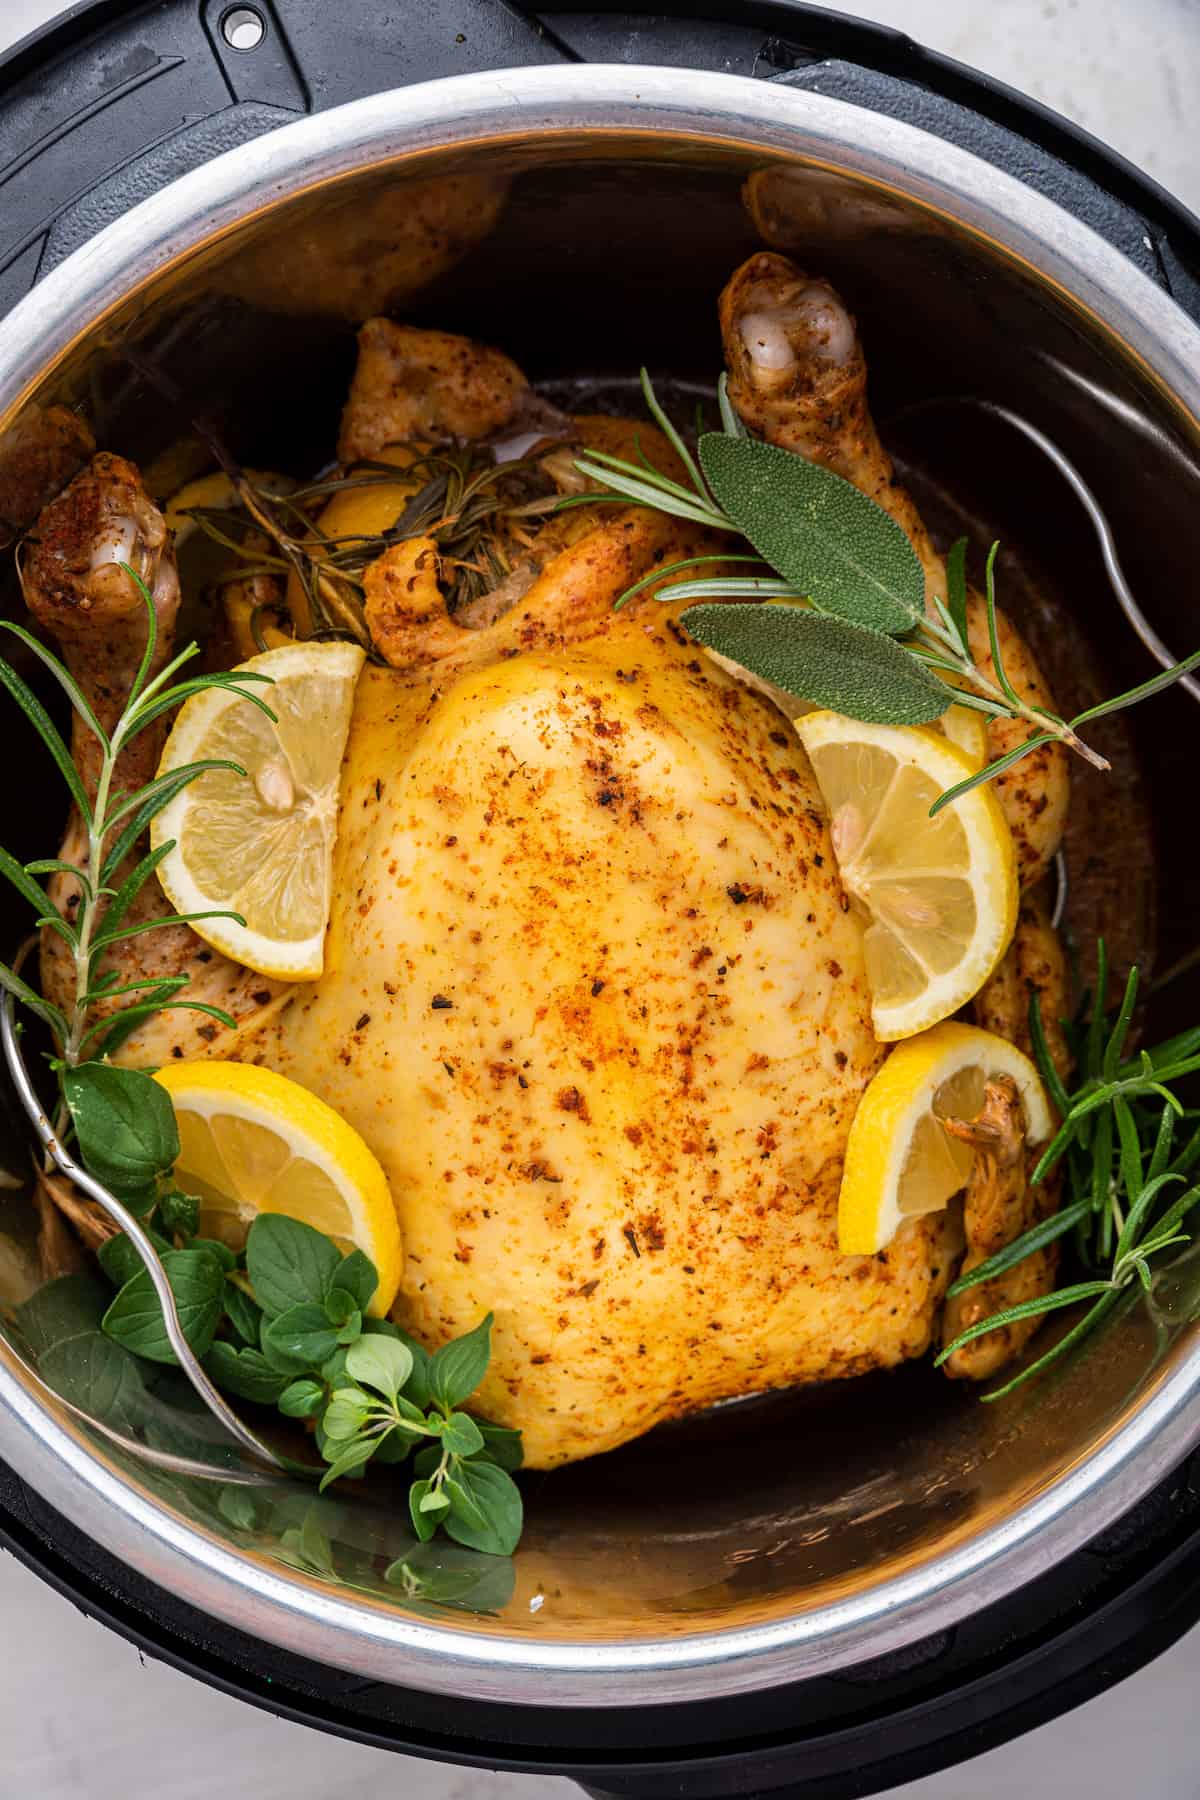 Overhead view of whole chicken cooked in Instant Pot